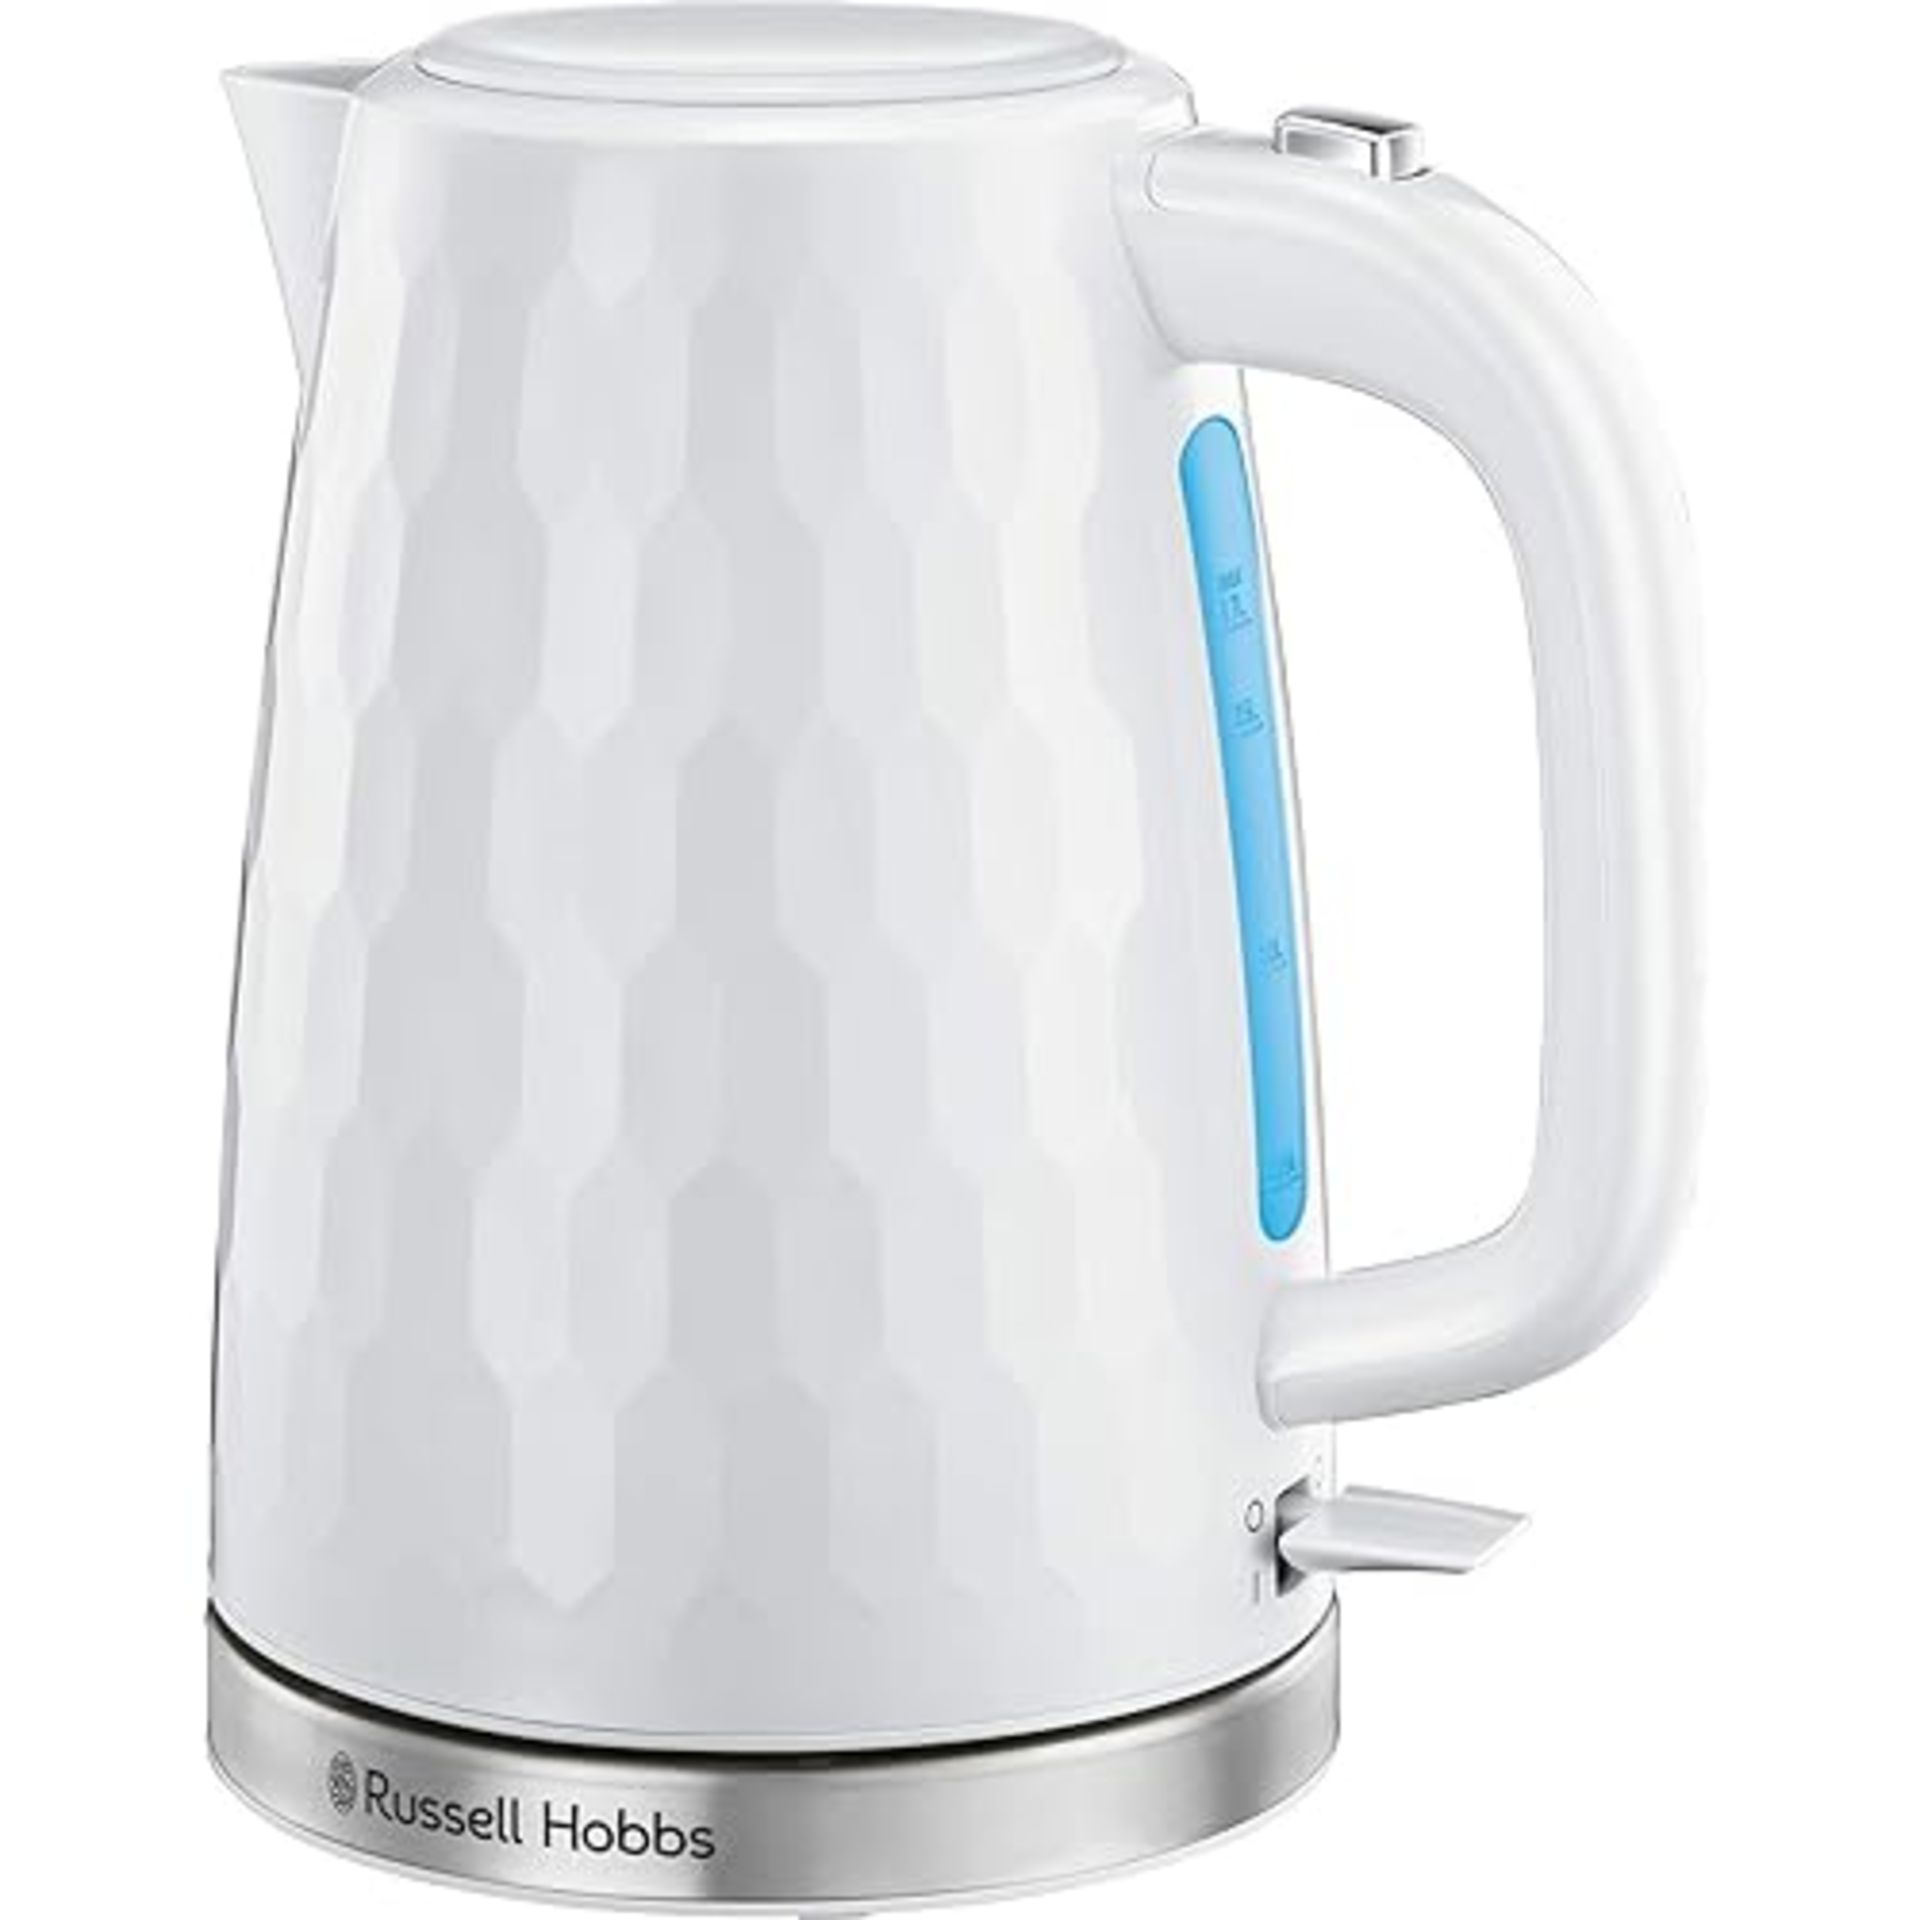 Russell Hobbs 26050 Cordless Electric Kettle - Contemporary Honeycomb Design with Fast Boil and B...